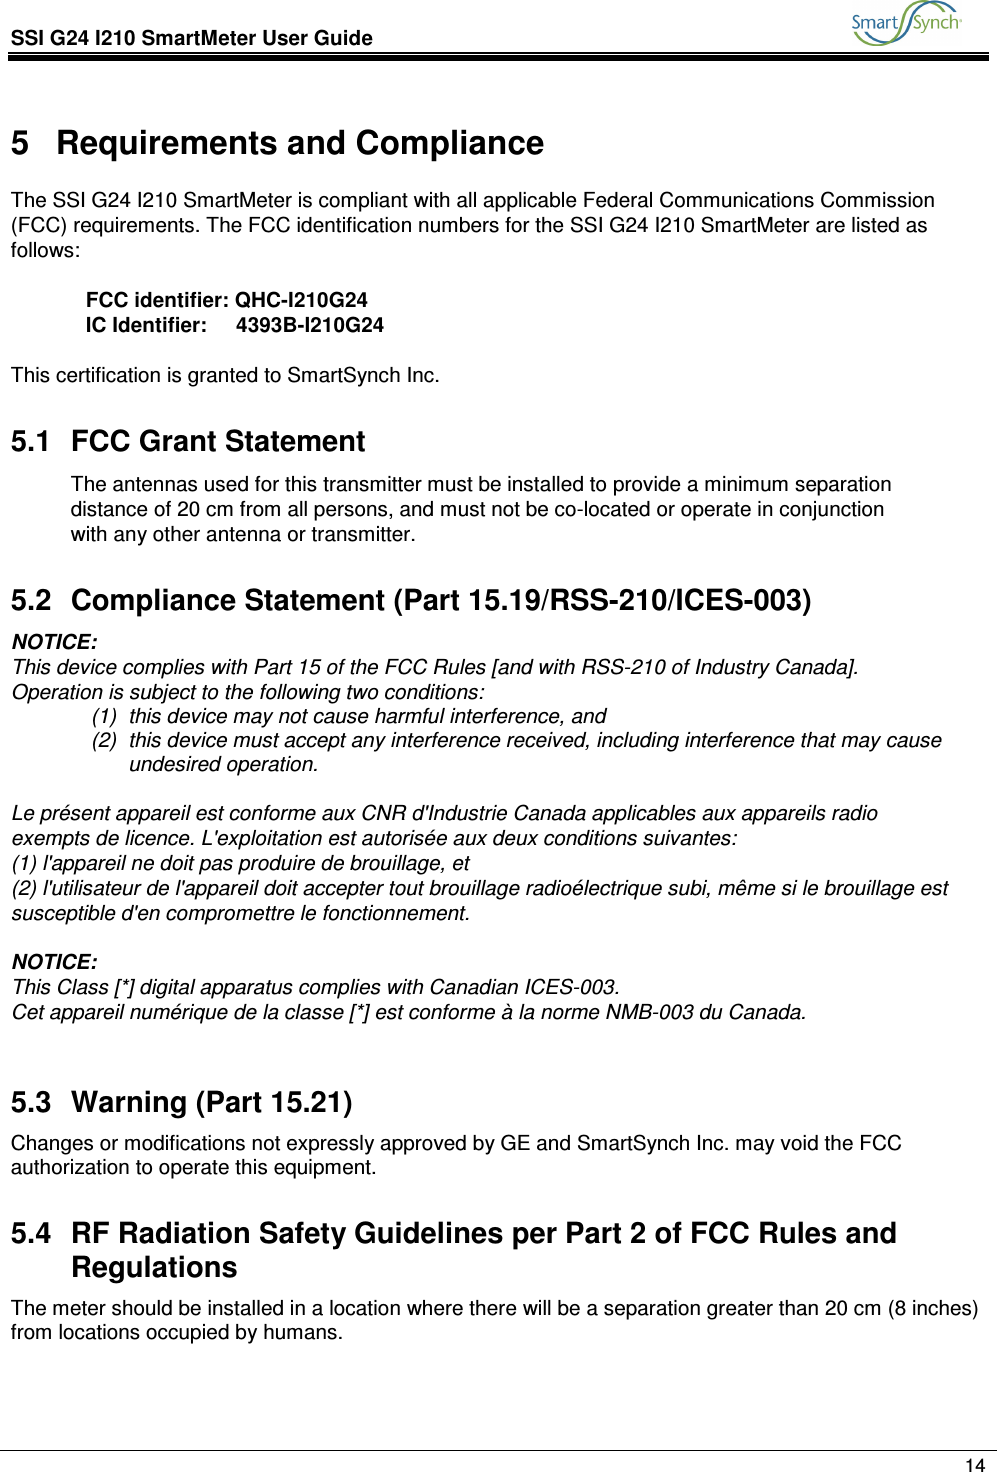 SSI G24 I210 SmartMeter User Guide               14  5  Requirements and Compliance The SSI G24 I210 SmartMeter is compliant with all applicable Federal Communications Commission (FCC) requirements. The FCC identification numbers for the SSI G24 I210 SmartMeter are listed as follows:  FCC identifier: QHC-I210G24 IC Identifier:     4393B-I210G24  This certification is granted to SmartSynch Inc. 5.1  FCC Grant Statement The antennas used for this transmitter must be installed to provide a minimum separation distance of 20 cm from all persons, and must not be co-located or operate in conjunction with any other antenna or transmitter.  5.2  Compliance Statement (Part 15.19/RSS-210/ICES-003) NOTICE: This device complies with Part 15 of the FCC Rules [and with RSS-210 of Industry Canada]. Operation is subject to the following two conditions: (1)  this device may not cause harmful interference, and  (2)  this device must accept any interference received, including interference that may cause undesired operation.  Le présent appareil est conforme aux CNR d&apos;Industrie Canada applicables aux appareils radio exempts de licence. L&apos;exploitation est autorisée aux deux conditions suivantes: (1) l&apos;appareil ne doit pas produire de brouillage, et  (2) l&apos;utilisateur de l&apos;appareil doit accepter tout brouillage radioélectrique subi, même si le brouillage est susceptible d&apos;en compromettre le fonctionnement.  NOTICE:  This Class [*] digital apparatus complies with Canadian ICES-003. Cet appareil numérique de la classe [*] est conforme à la norme NMB-003 du Canada.  5.3  Warning (Part 15.21) Changes or modifications not expressly approved by GE and SmartSynch Inc. may void the FCC authorization to operate this equipment. 5.4  RF Radiation Safety Guidelines per Part 2 of FCC Rules and Regulations The meter should be installed in a location where there will be a separation greater than 20 cm (8 inches) from locations occupied by humans.    